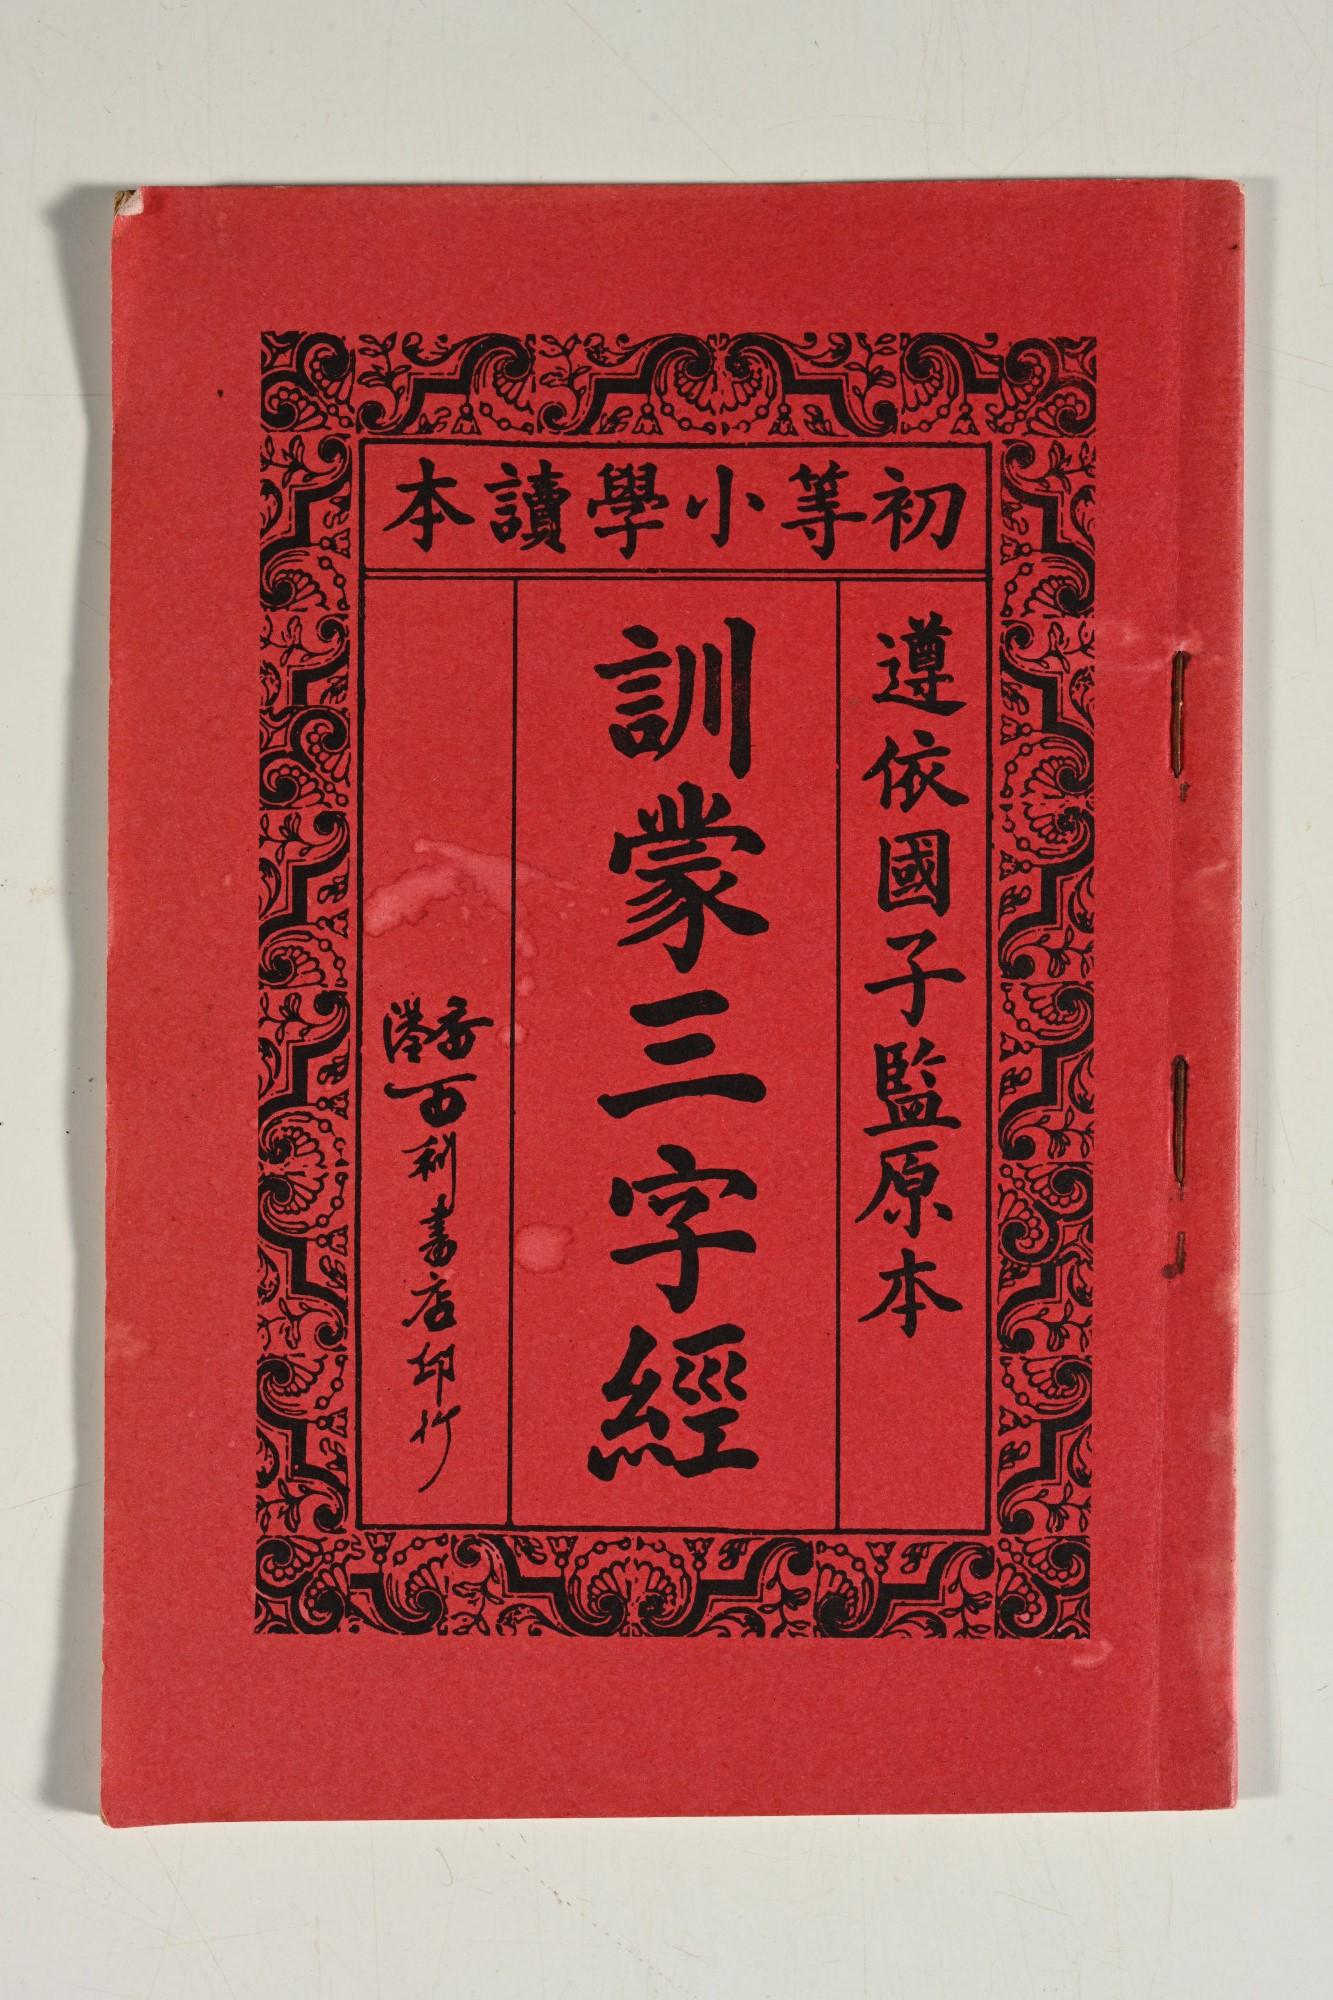 The Dr Sun Yat-sen Museum will launch a new special exhibition, "Learning through play: Old textbooks, toys and games", tomorrow (December 22). Photo shows a Xunmeng Sanzijing ("Three character classic for early learners"), printed by Pak Lei Bookstore of Hong Kong in the 1930s.
